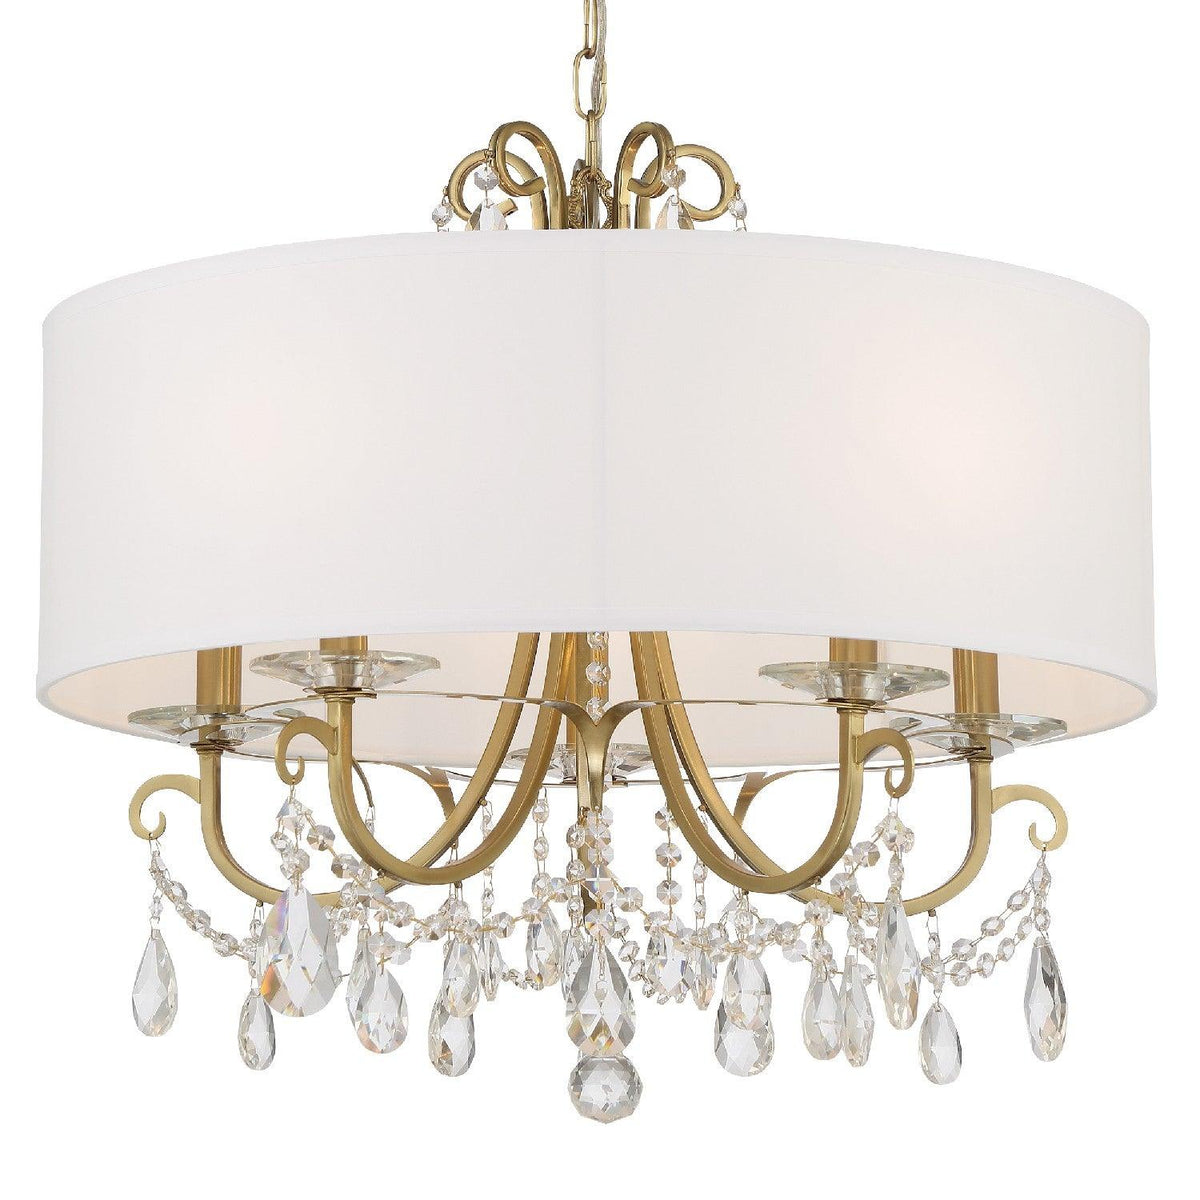 Crystorama - Othello Drum Shade Chandelier - 6625-VG-CL-MWP | Montreal Lighting & Hardware